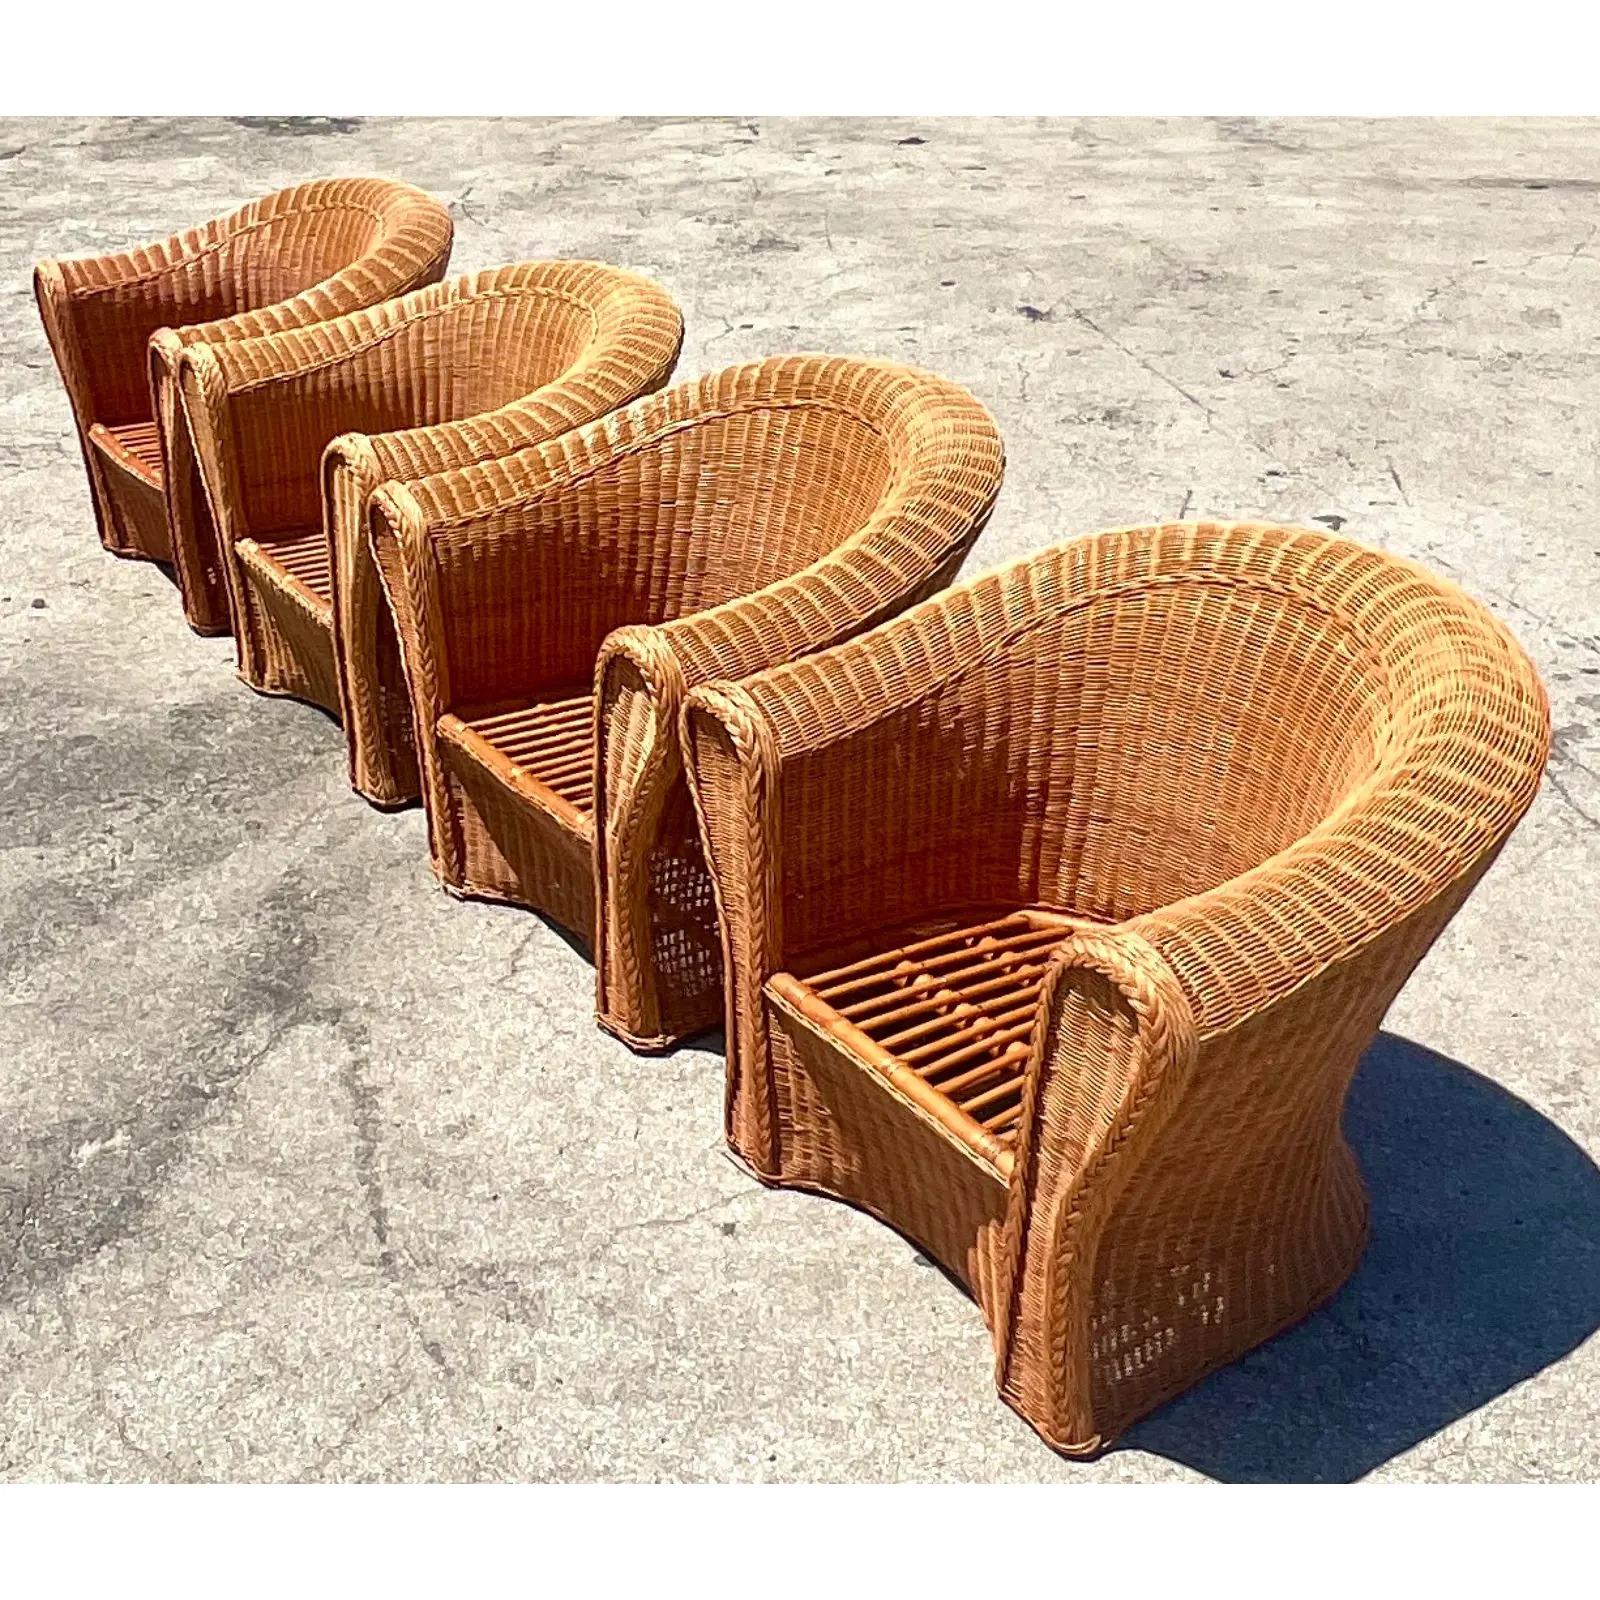 North American Vintage Coastal Woven Rattan Lounge Chairs, Set of 4